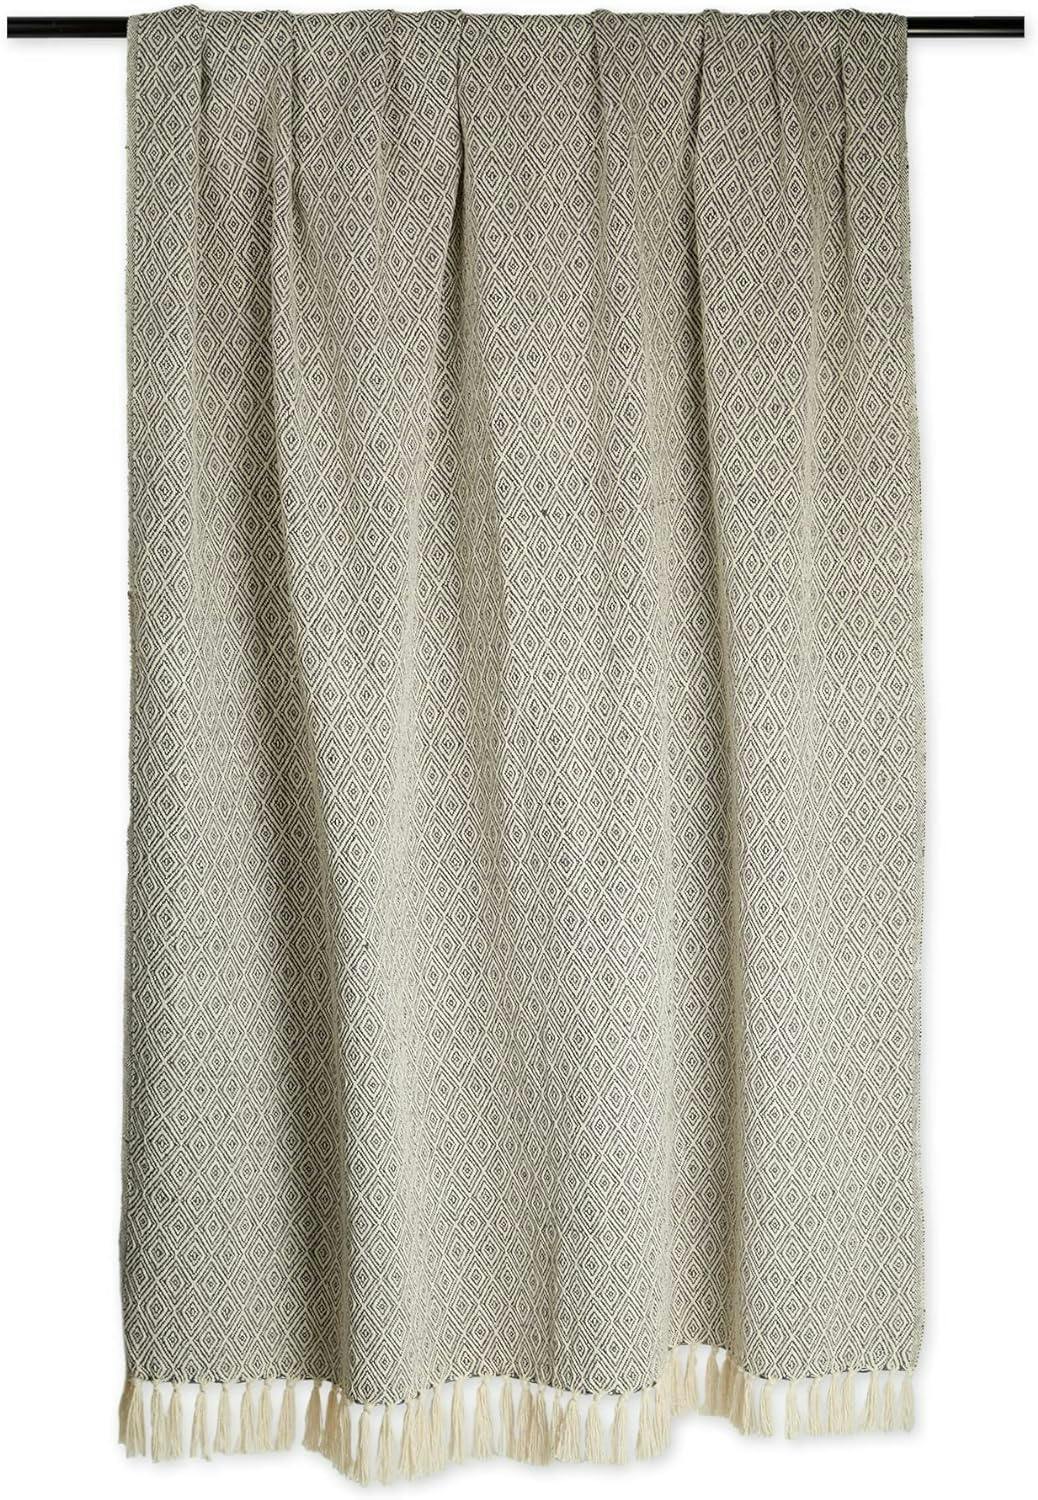 Cozy Sherpa-Cotton Blend Throw Blanket in Mineral Gray